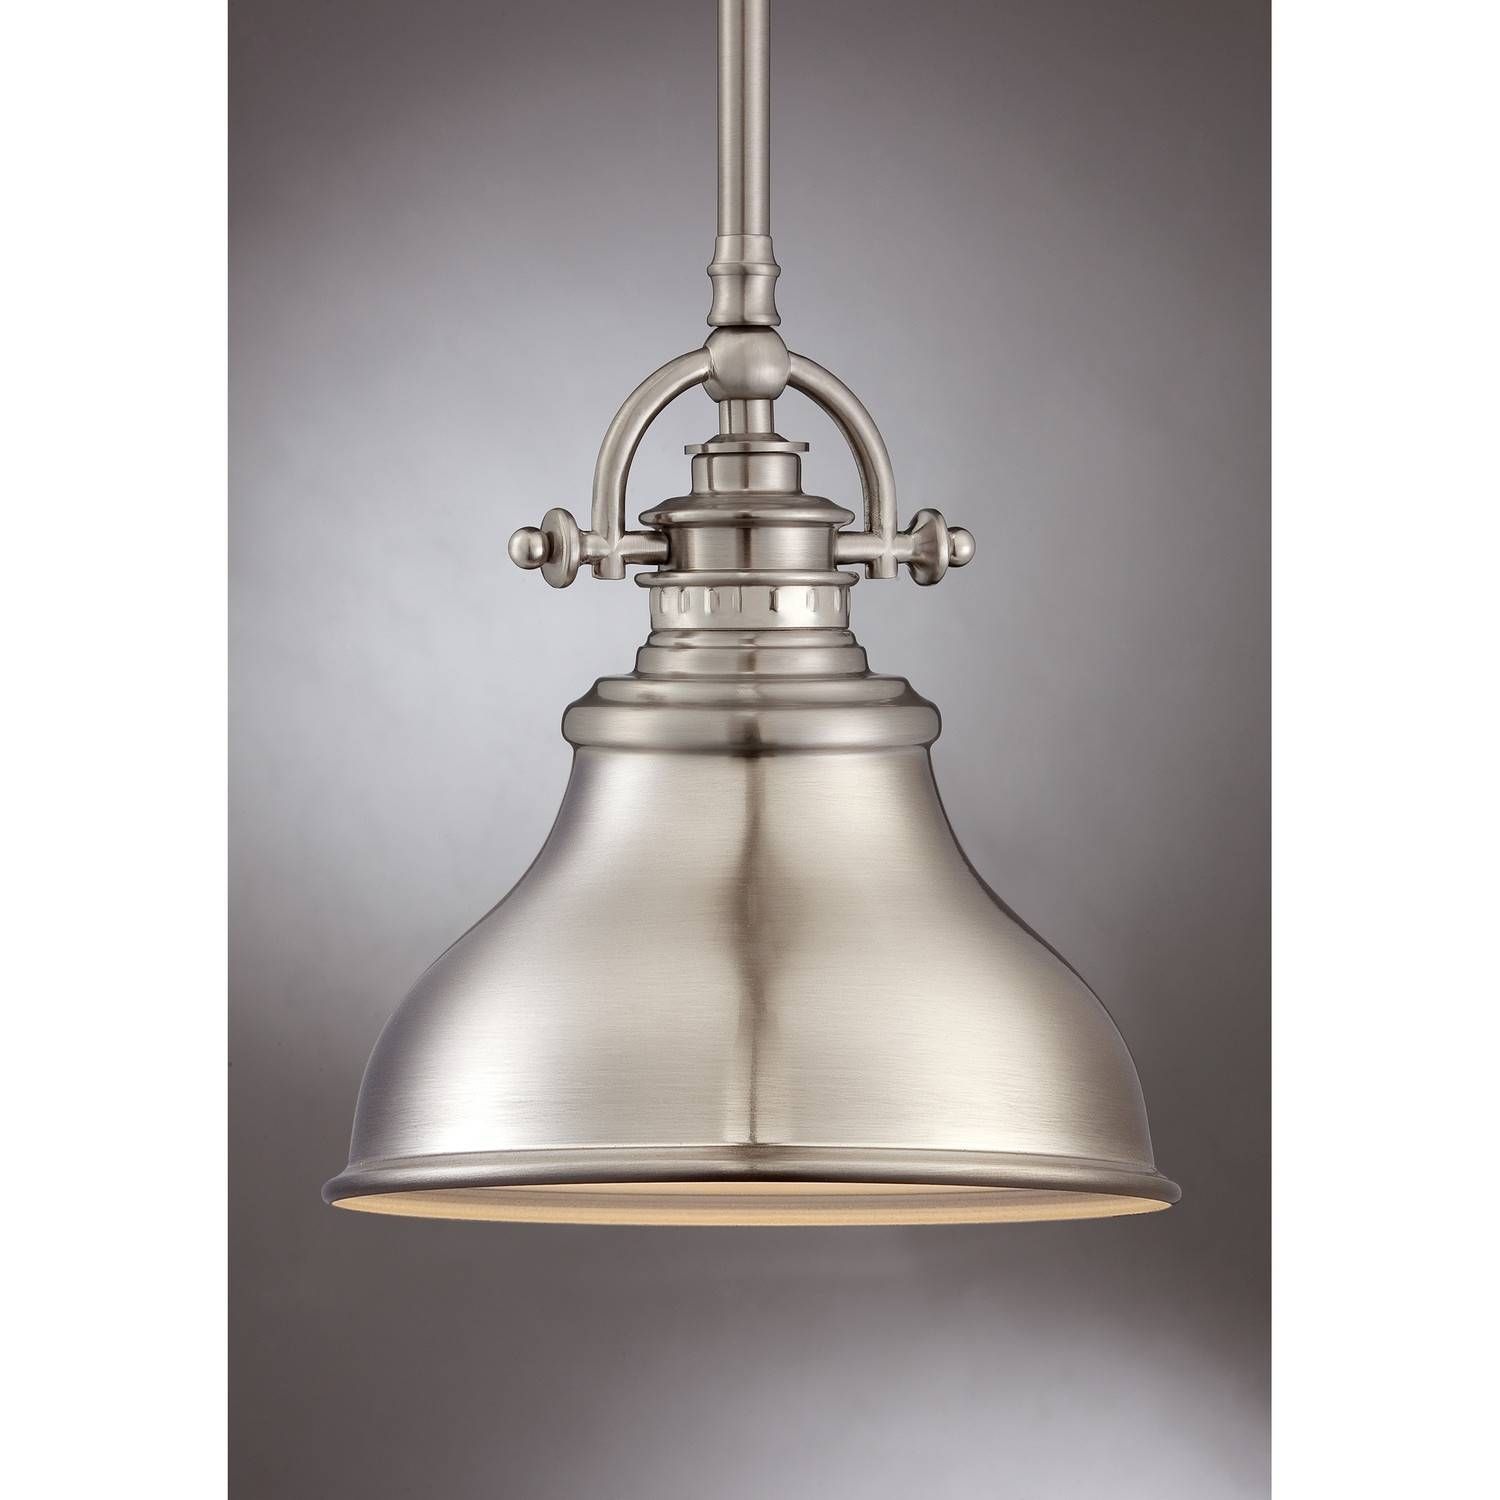 Brushed Nickel Pendant Lighting Kitchen – Baby Exit Throughout Quoizel Pendant Light Fixtures (View 15 of 15)